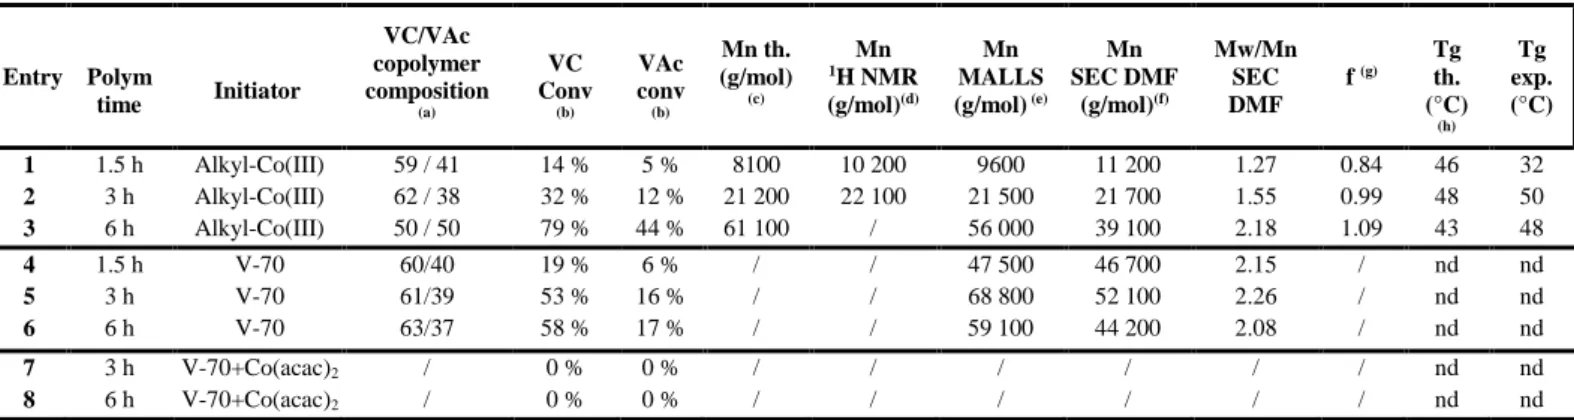 Table 5. Results of VC/VAc statistical copolymerization with low VC content using alkyl-Co(III) or V70 at 40°C 